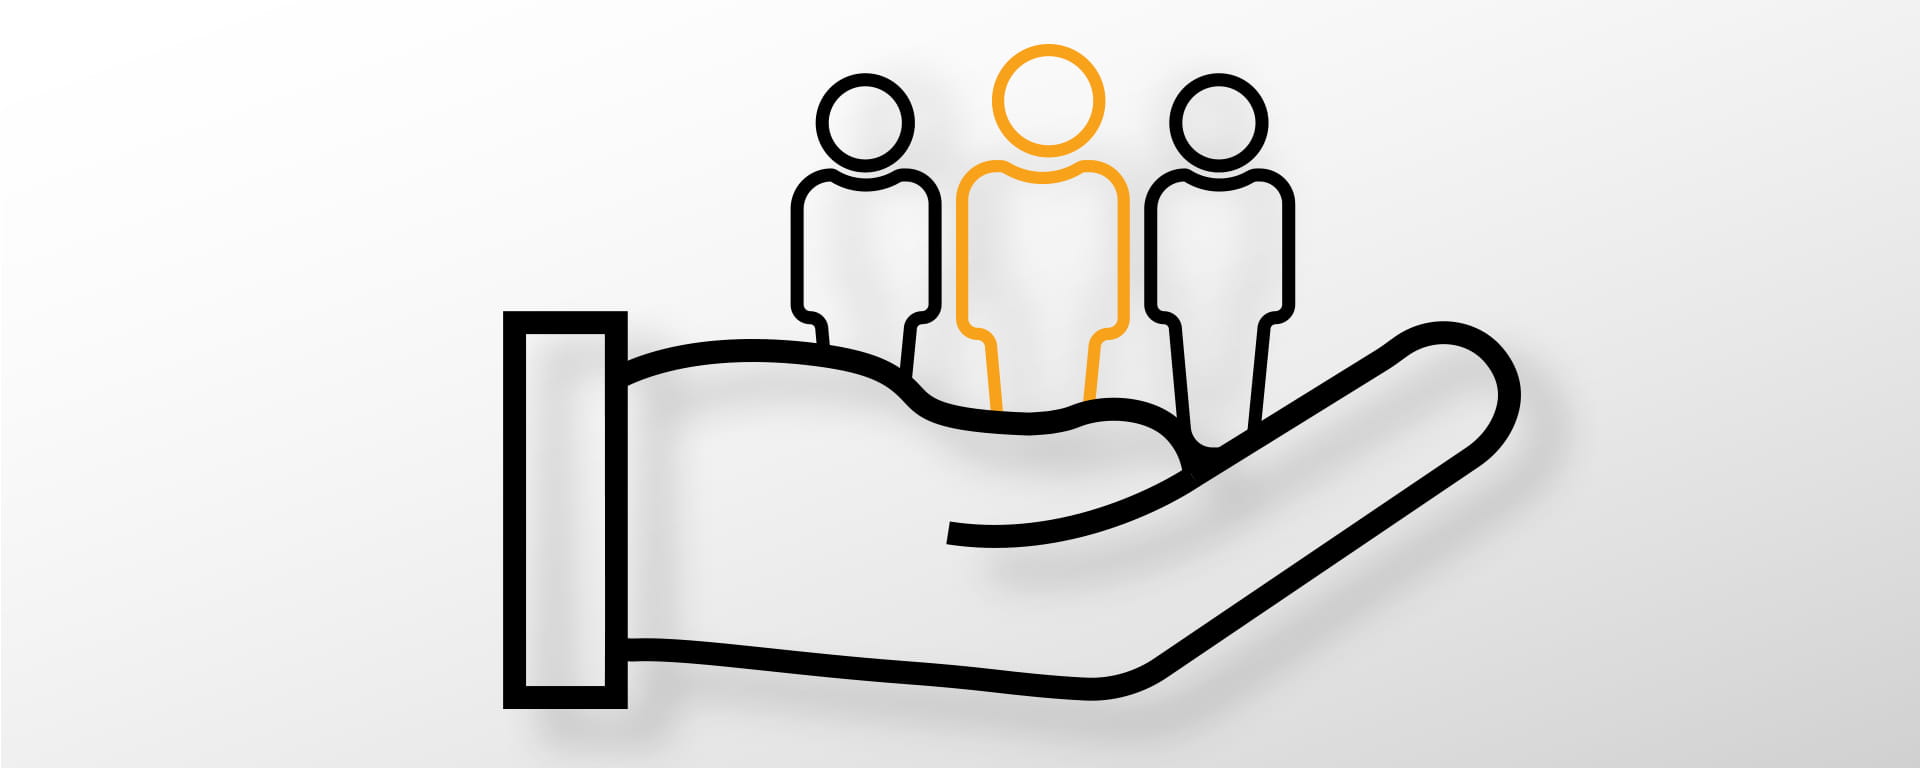 Social value graphic: a digital line drawing of a hand holding three people, in orange and black